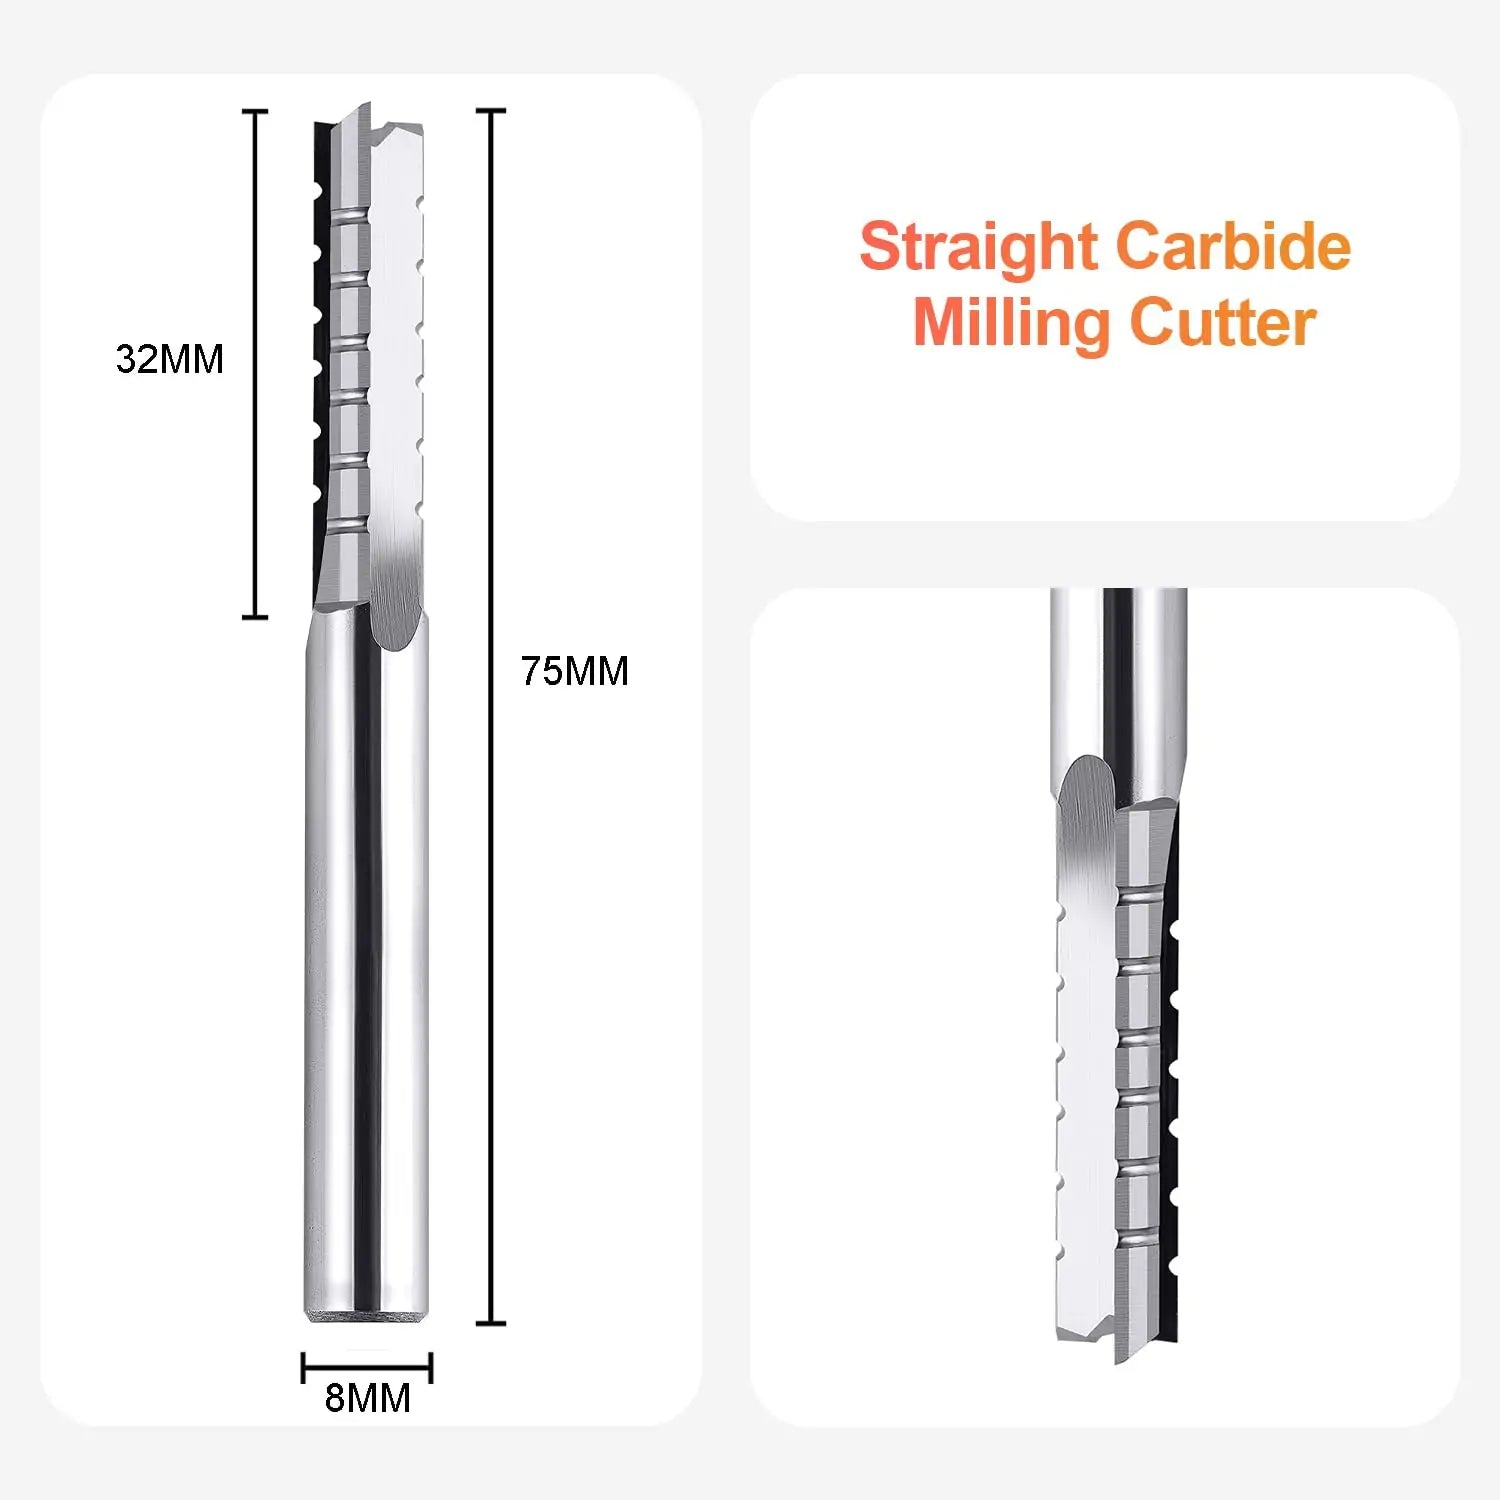 SpeTool EU 8mm Shank Diameter Straight Carbide Tungsten Carbide Tip Cutter 32mm Cutting Length 3 Flutes Carving CNC Trimming Slot Chip Breaker Plywood End Mill for Woodworking